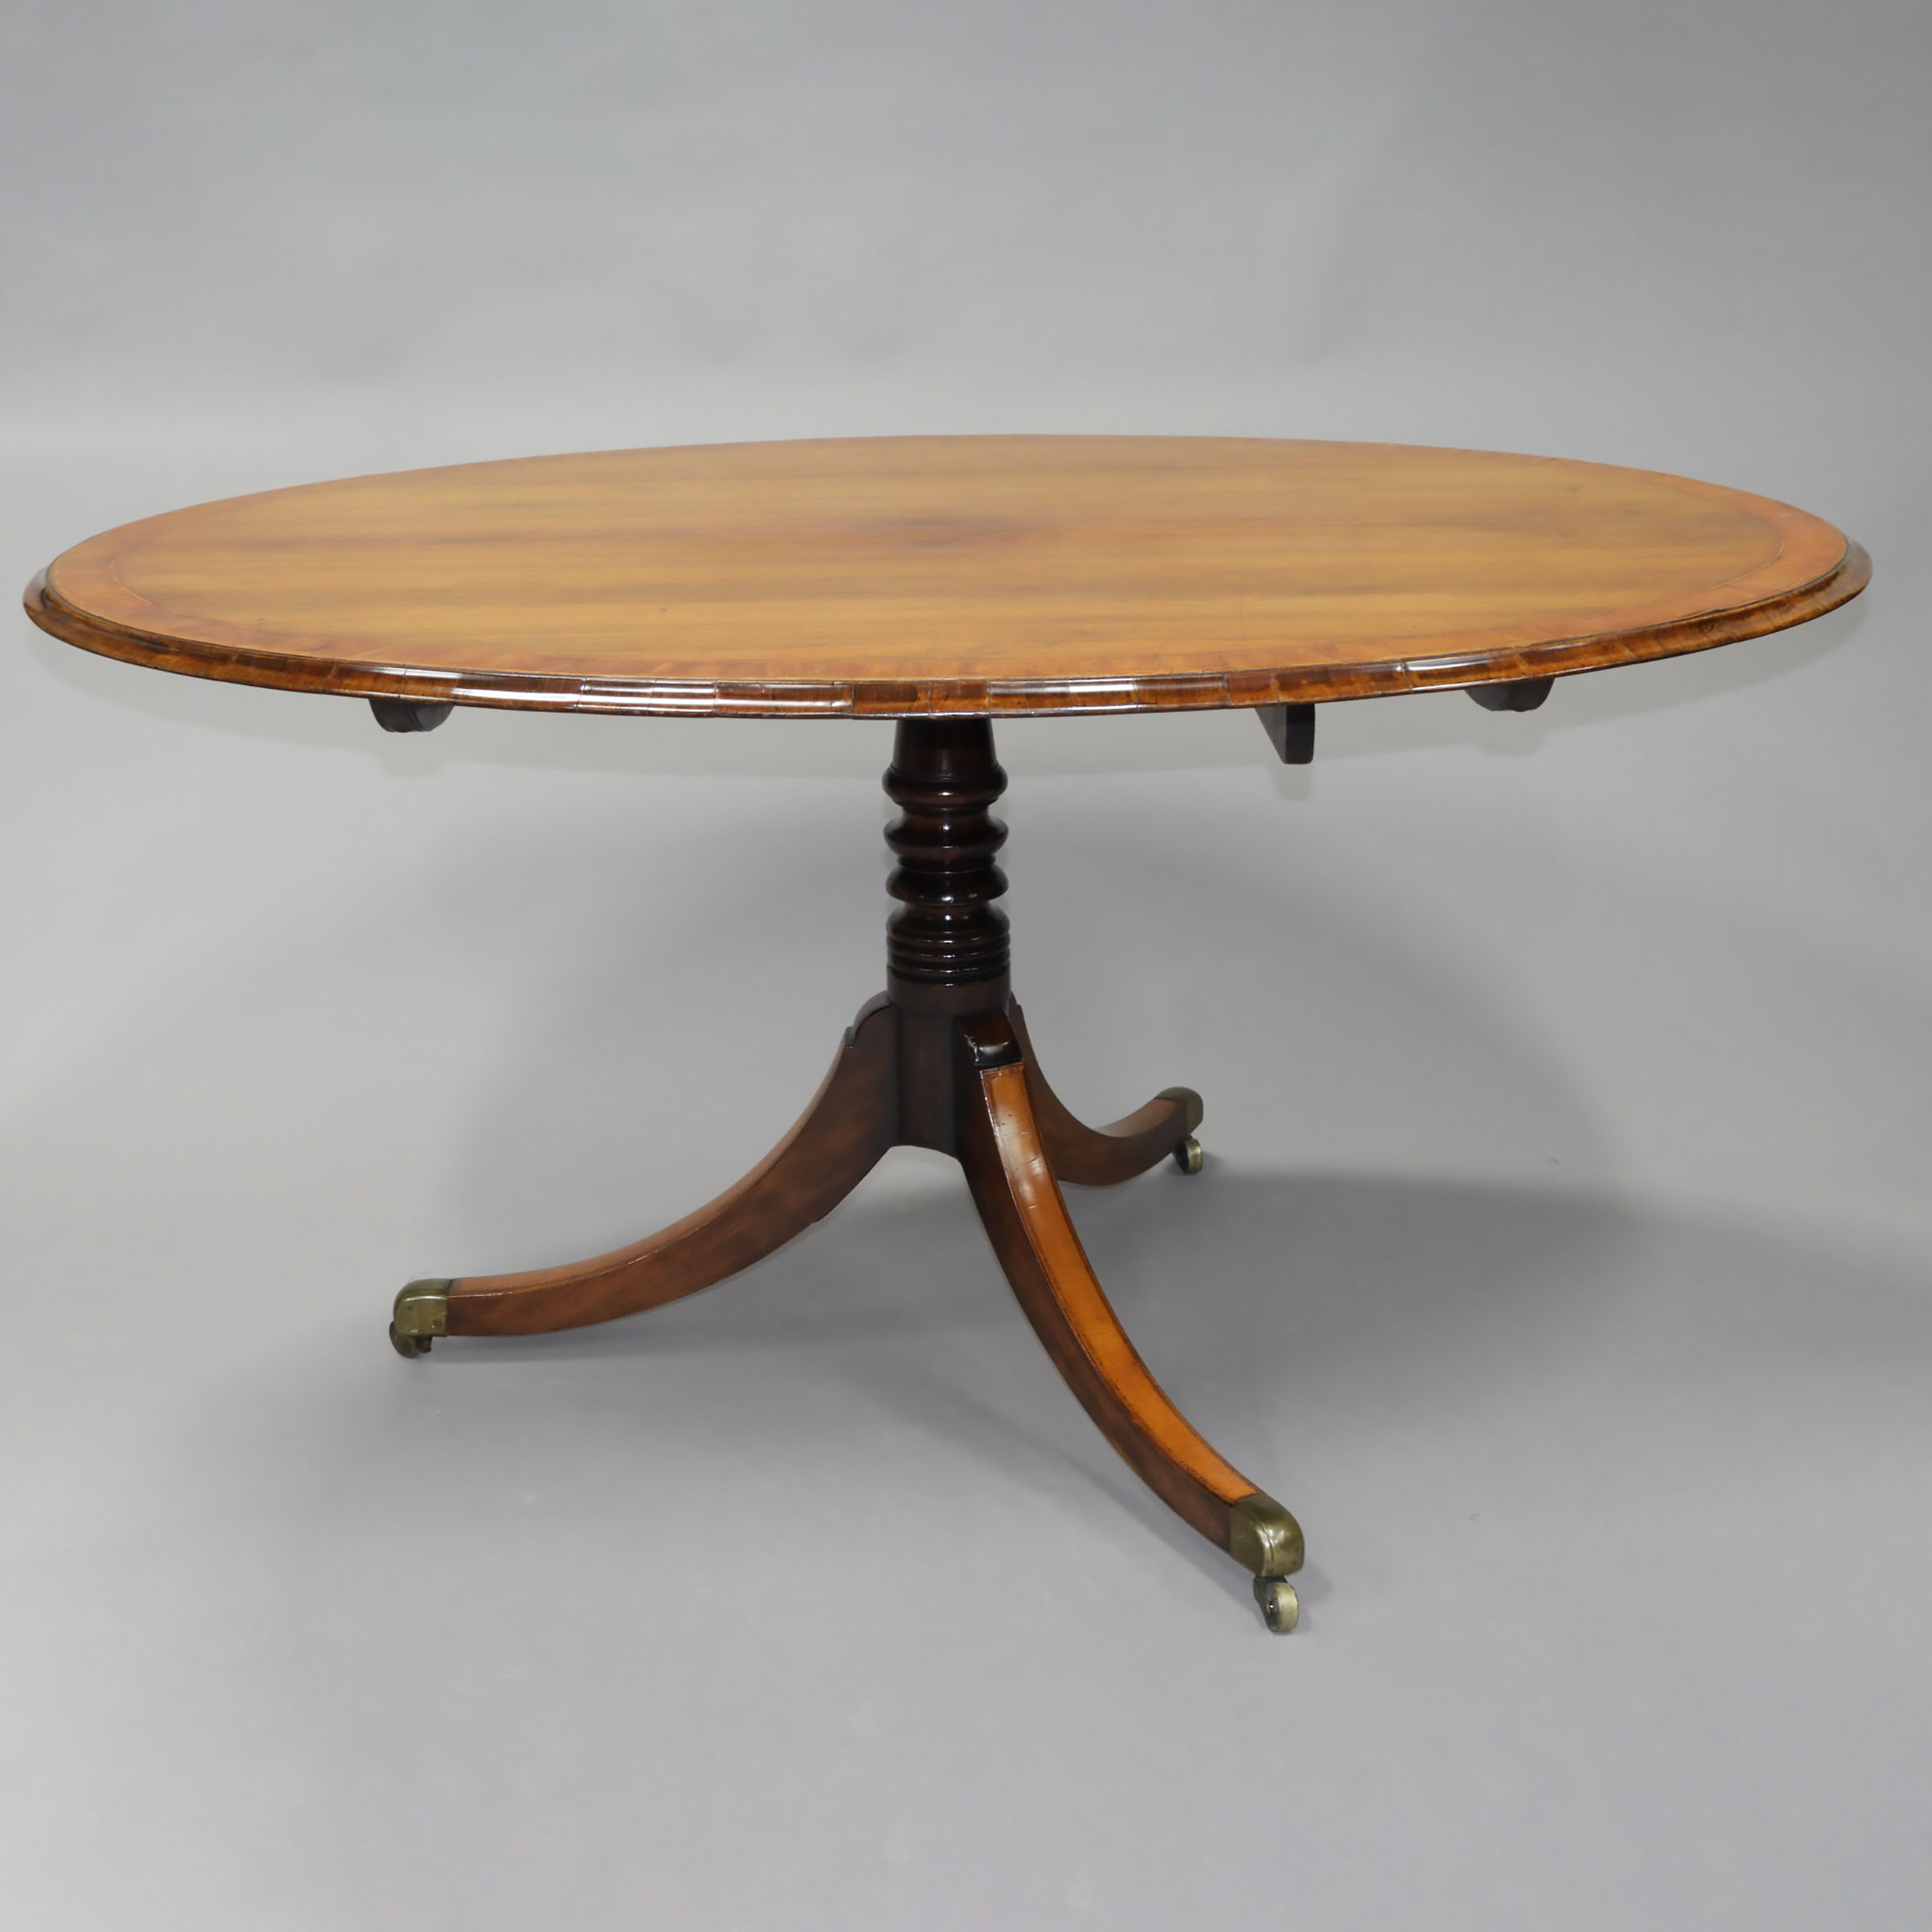 Regency Crossbanded and Inlaid Tilt Top Breakfast Table, early 19th century